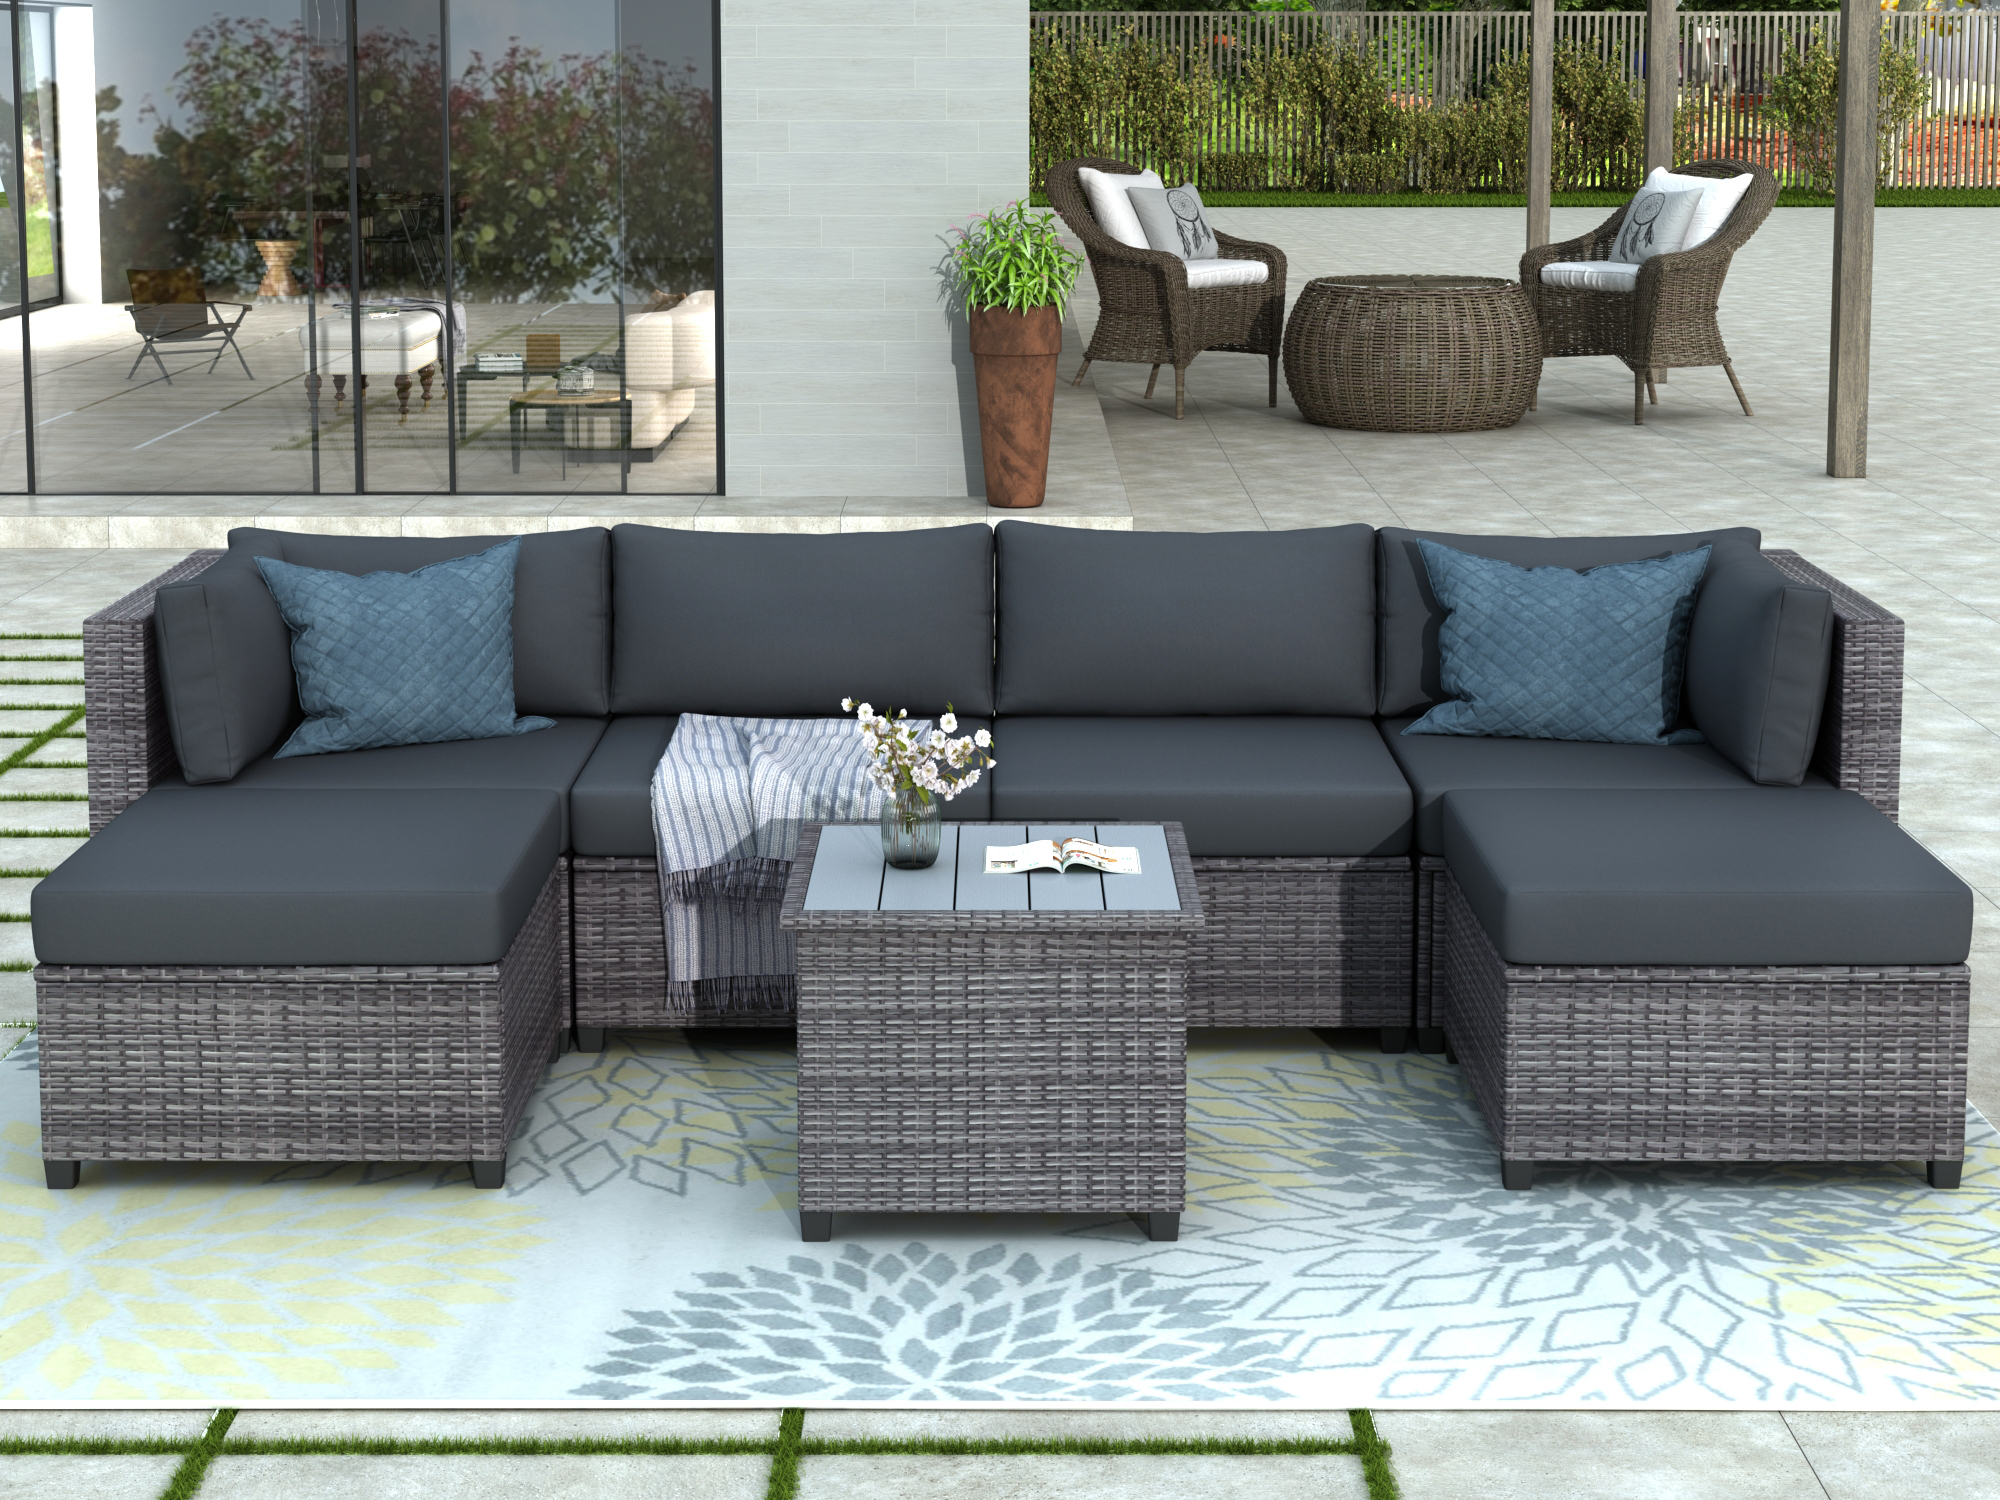 Wicker Patio Sets, 7 Piece Patio Furniture Sofa Sets with 4 PE Wicker Sofas, 2 Ottoman, Coffee Table, All-Weather Patio Conversation Set with Cushions for Backyard, Porch, Garden, Poolside, LLL39 - image 2 of 10